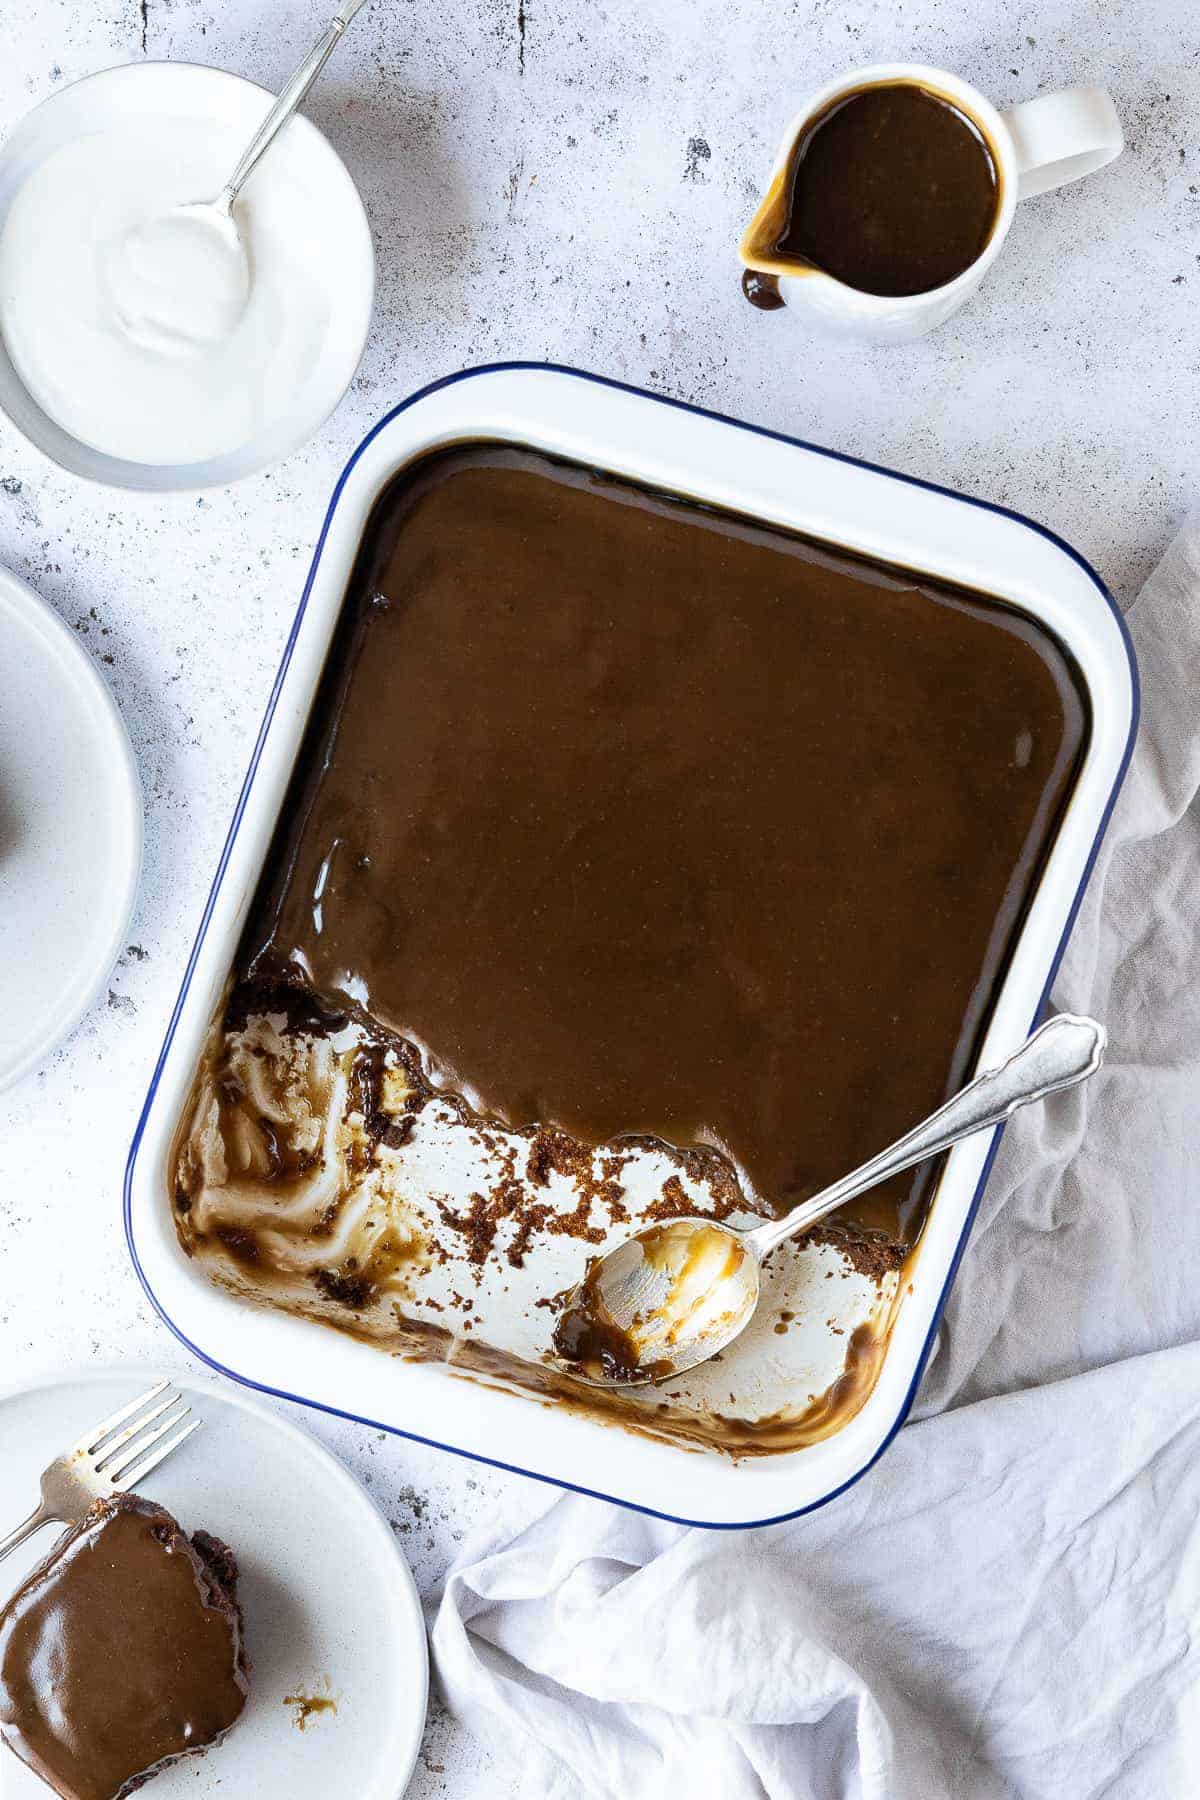 Vegan sticky toffee pudding in an enamel baking dish with several portions scooped out onto plates, with a jug of toffee sauce and a bowl of cream.